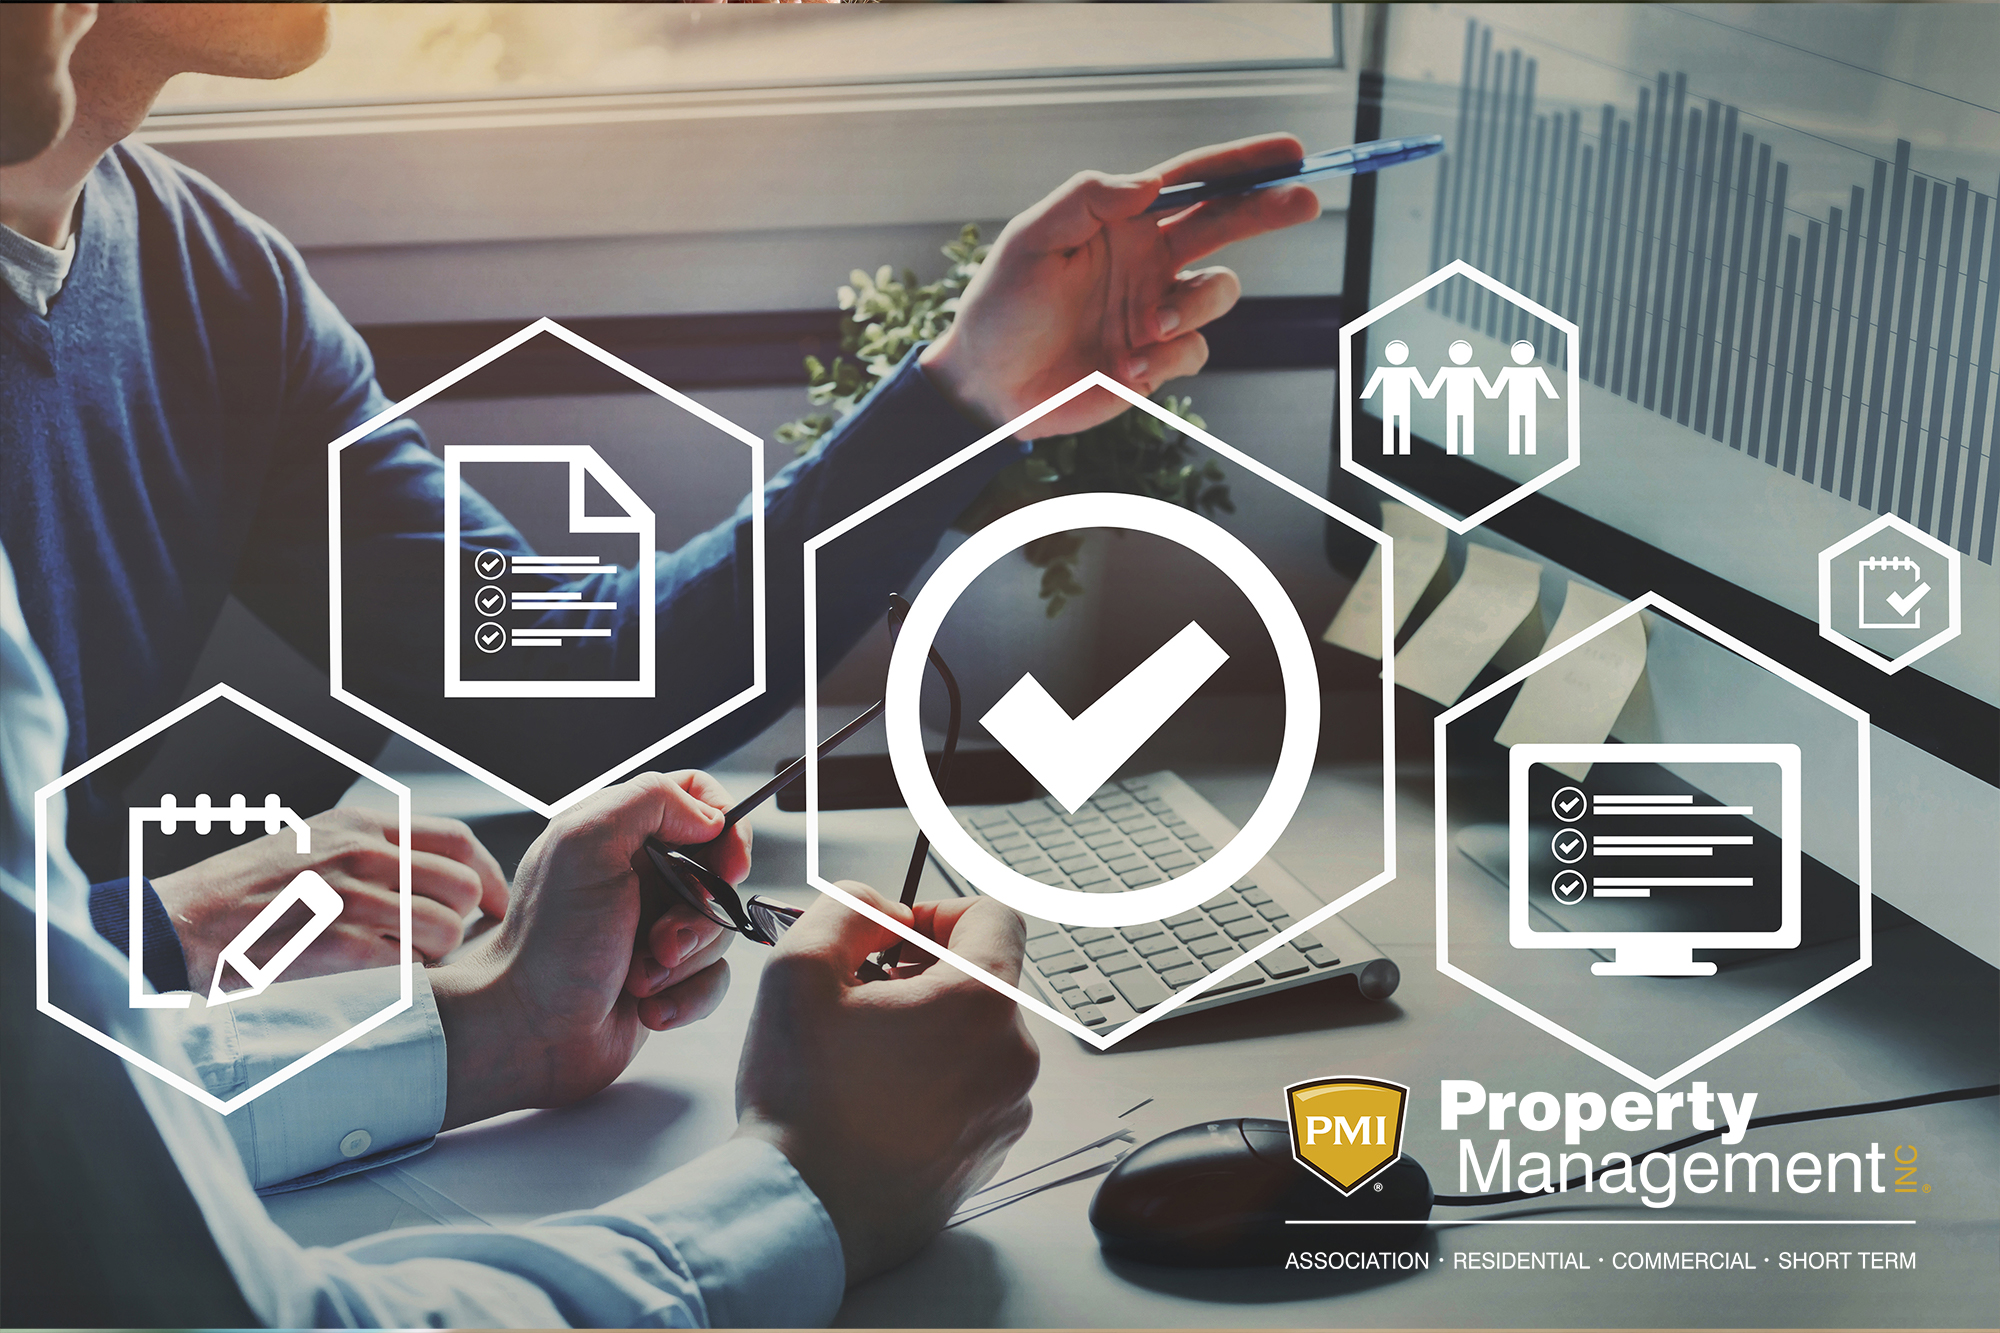 5 Areas You Should Be Focusing on That You Can Control as a Property Manager